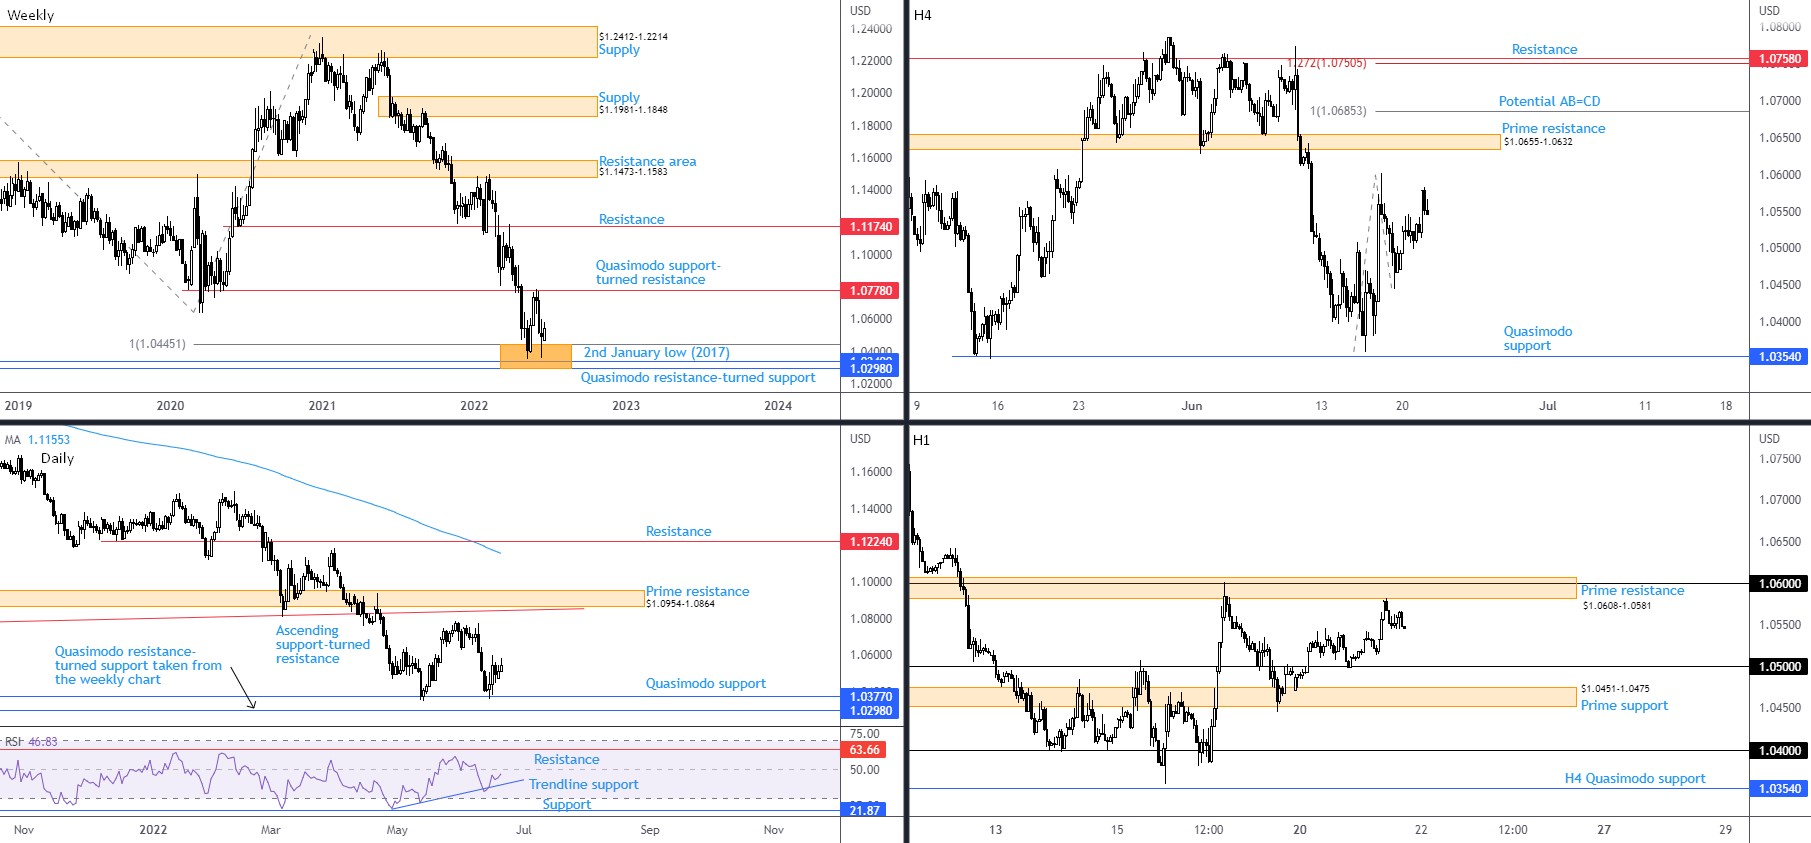 Technical View for June 22nd 2022: GBP/USD Indecisive Ahead of Inflation Data, FP Markets